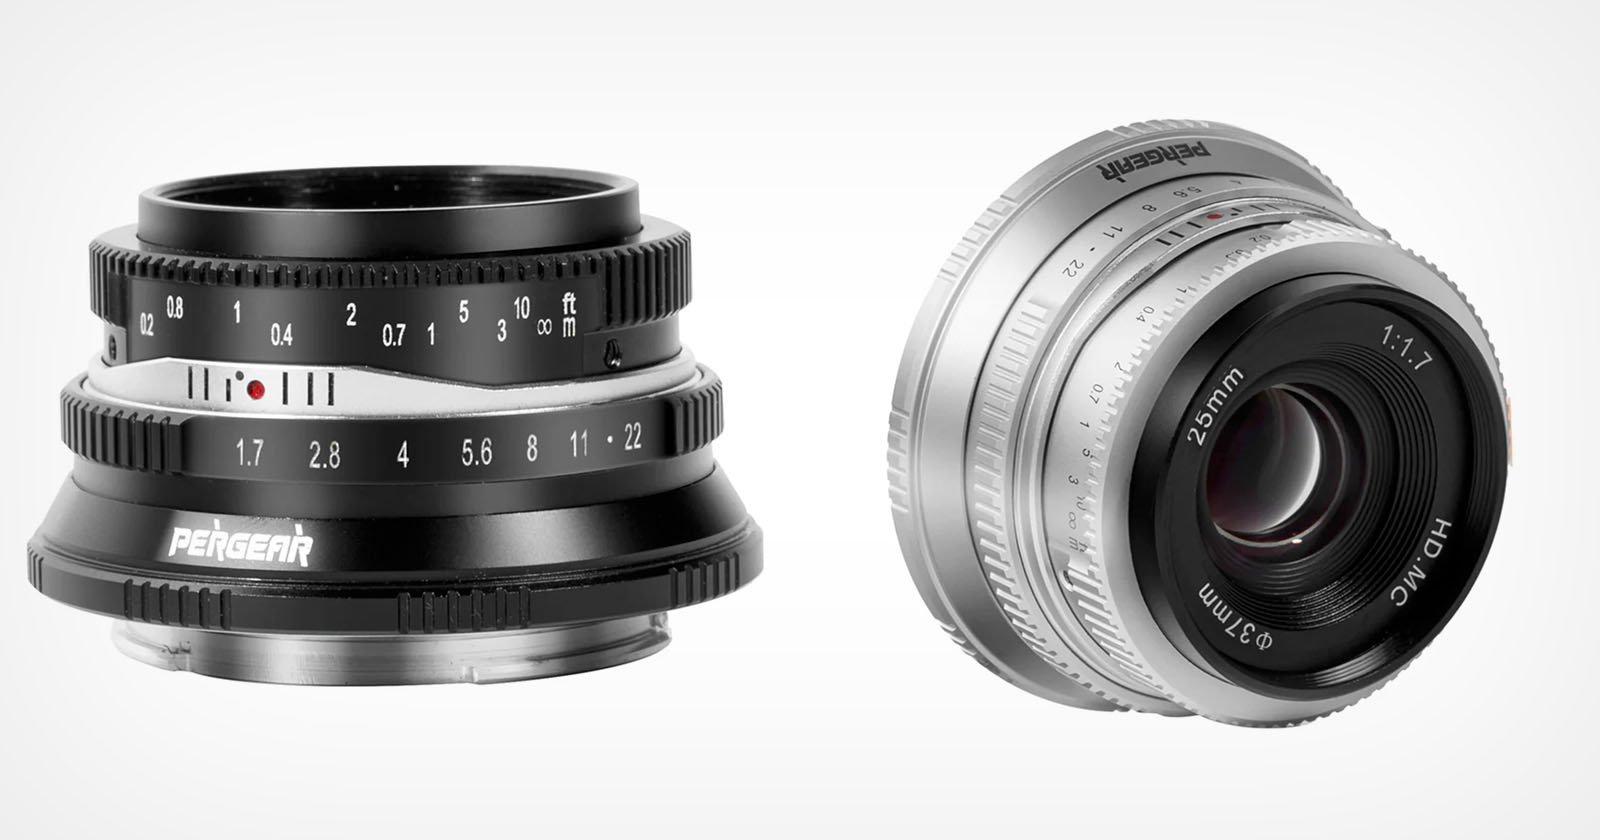 Pergears New 25mm f/1.7 APS-C Lens Costs Is Available Now for $69